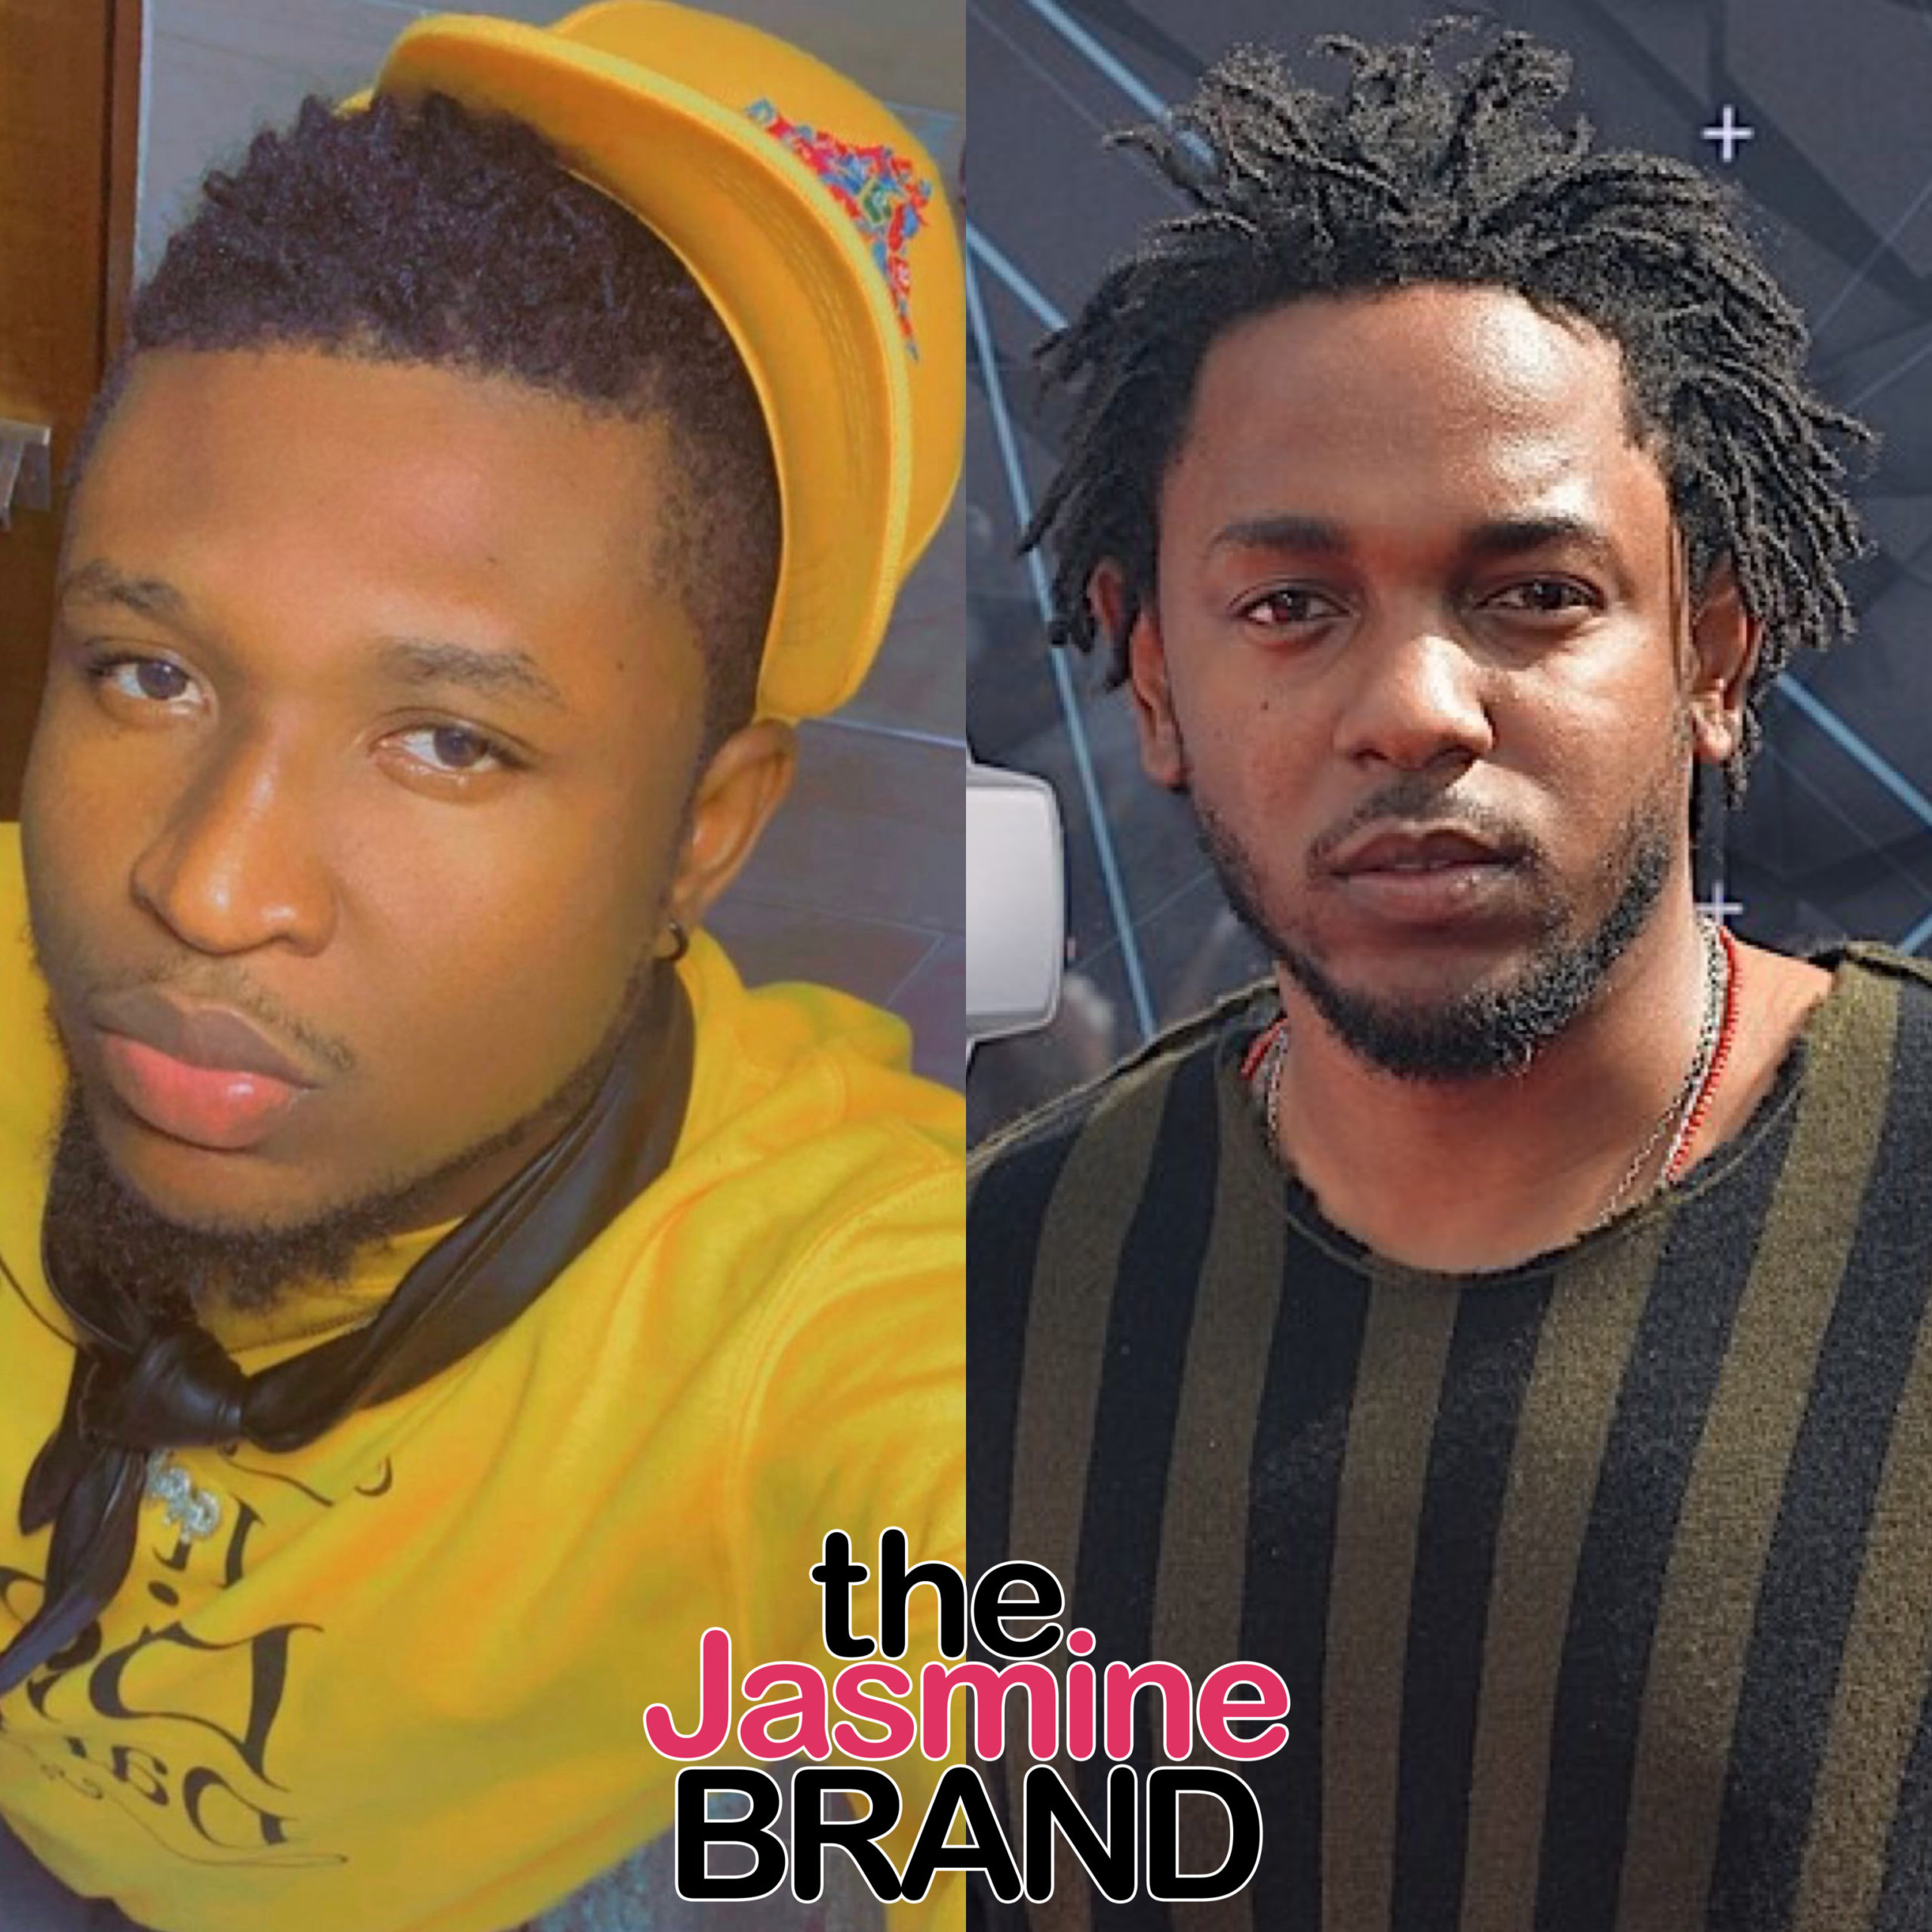 Haitian Rapper MechansT Issues Apology After Removing Song From New Album That Featured AI-Generated Kendrick Lamar Verse